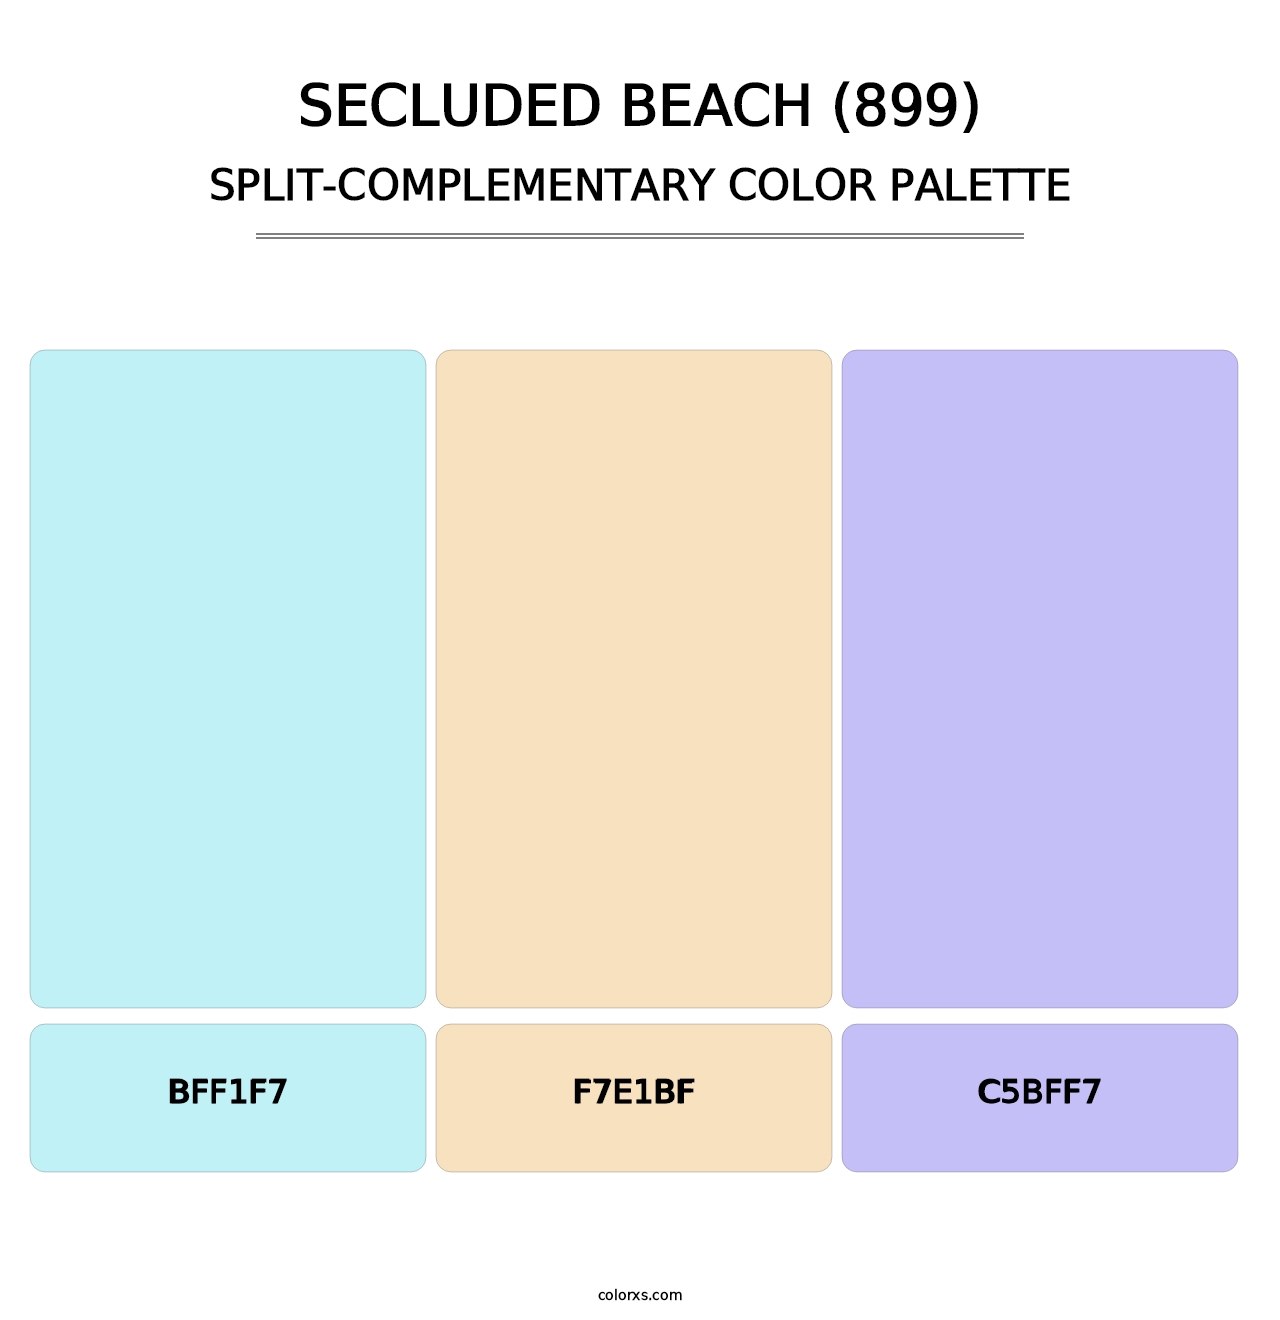 Secluded Beach (899) - Split-Complementary Color Palette